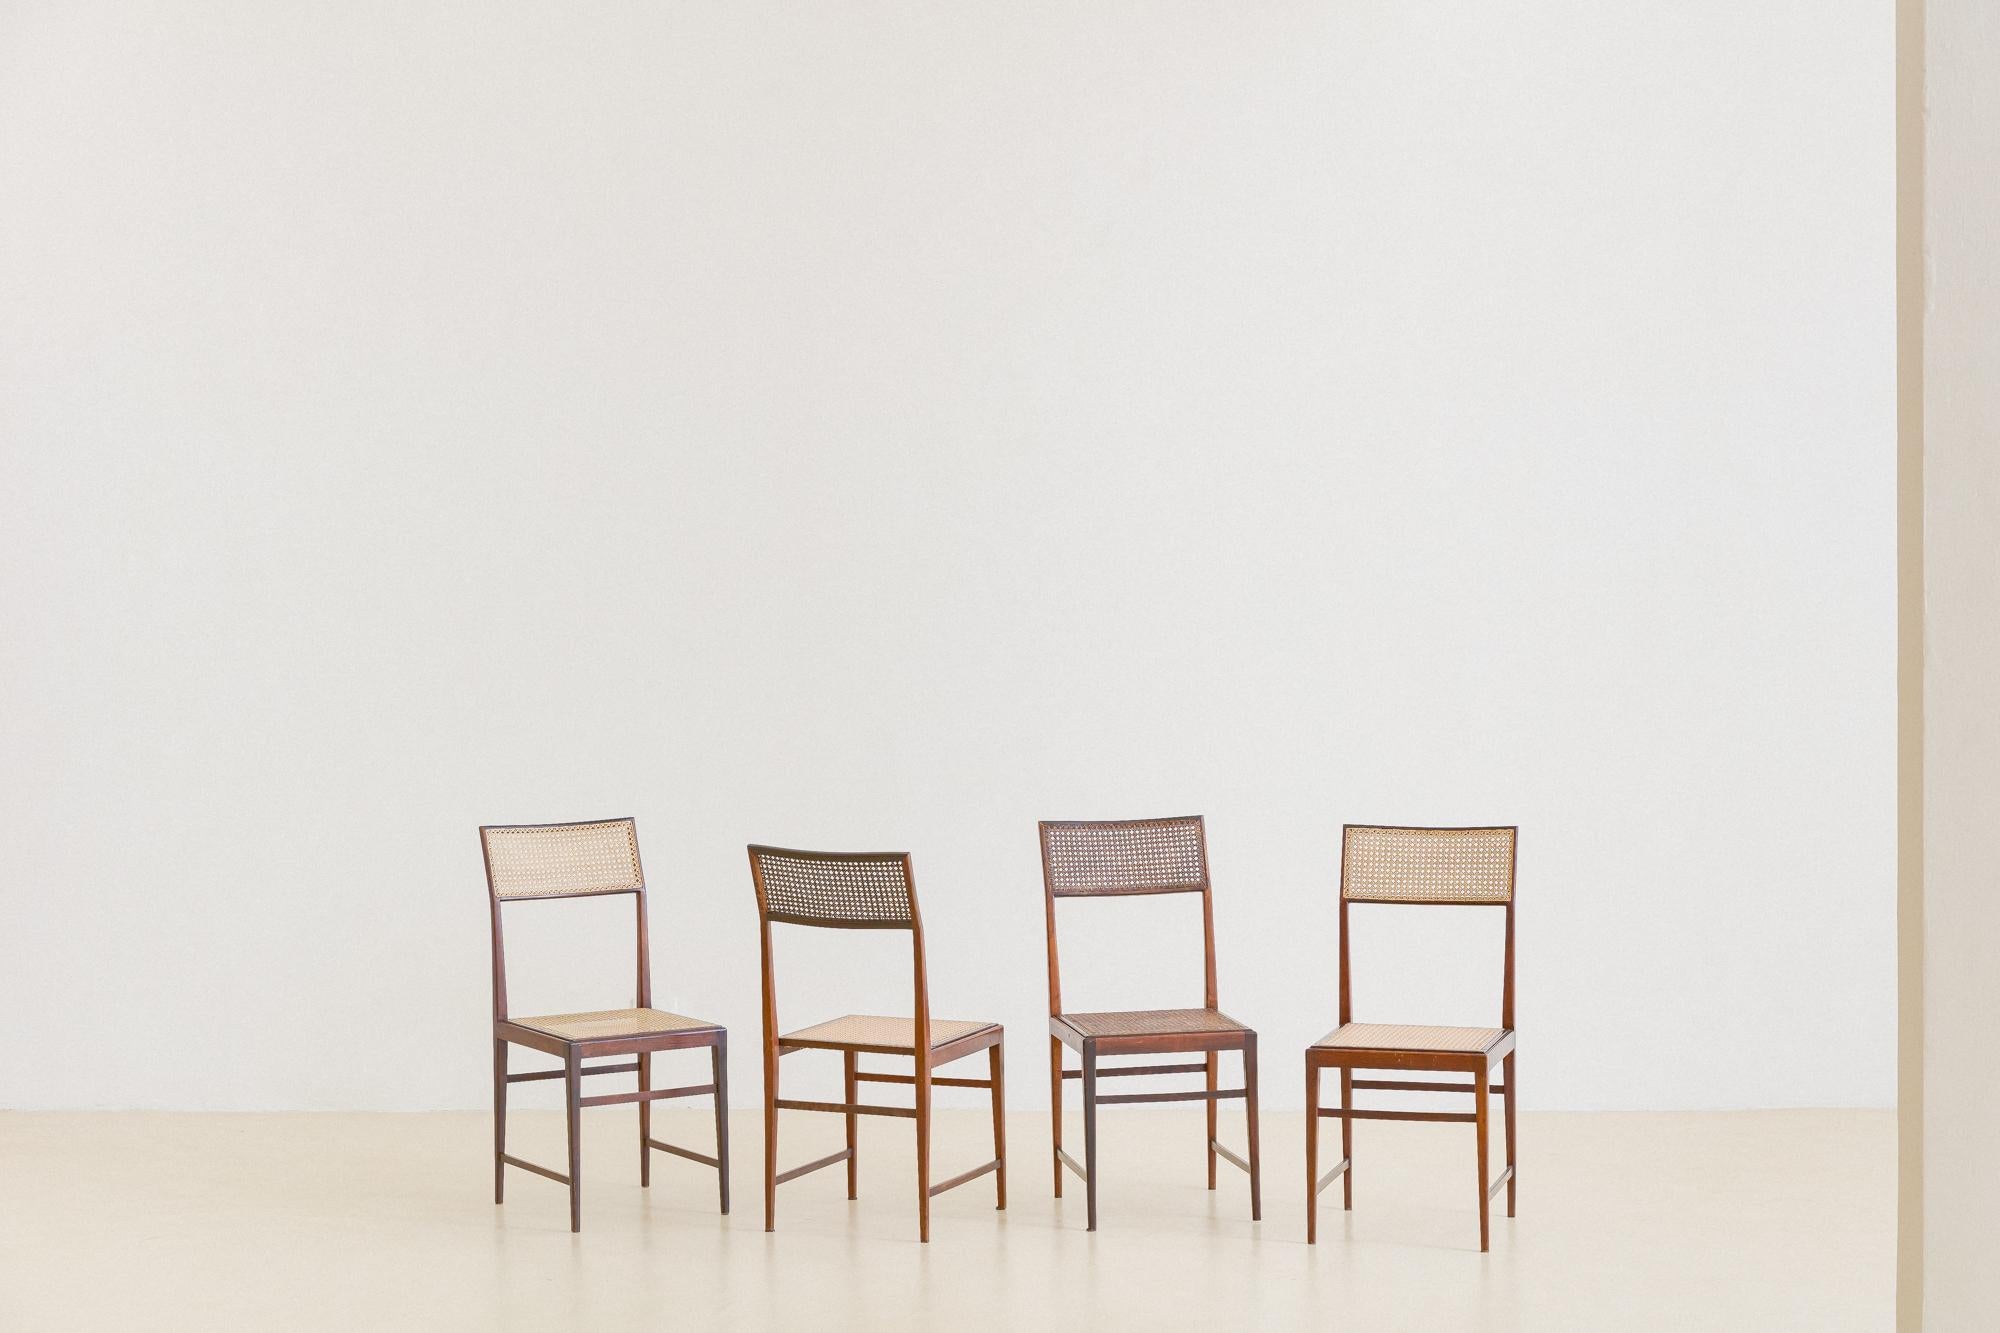 Brazilian Set of Four Dining Chairs by Joaquim Tenreiro, Rosewood and Cane, circa 1960 For Sale